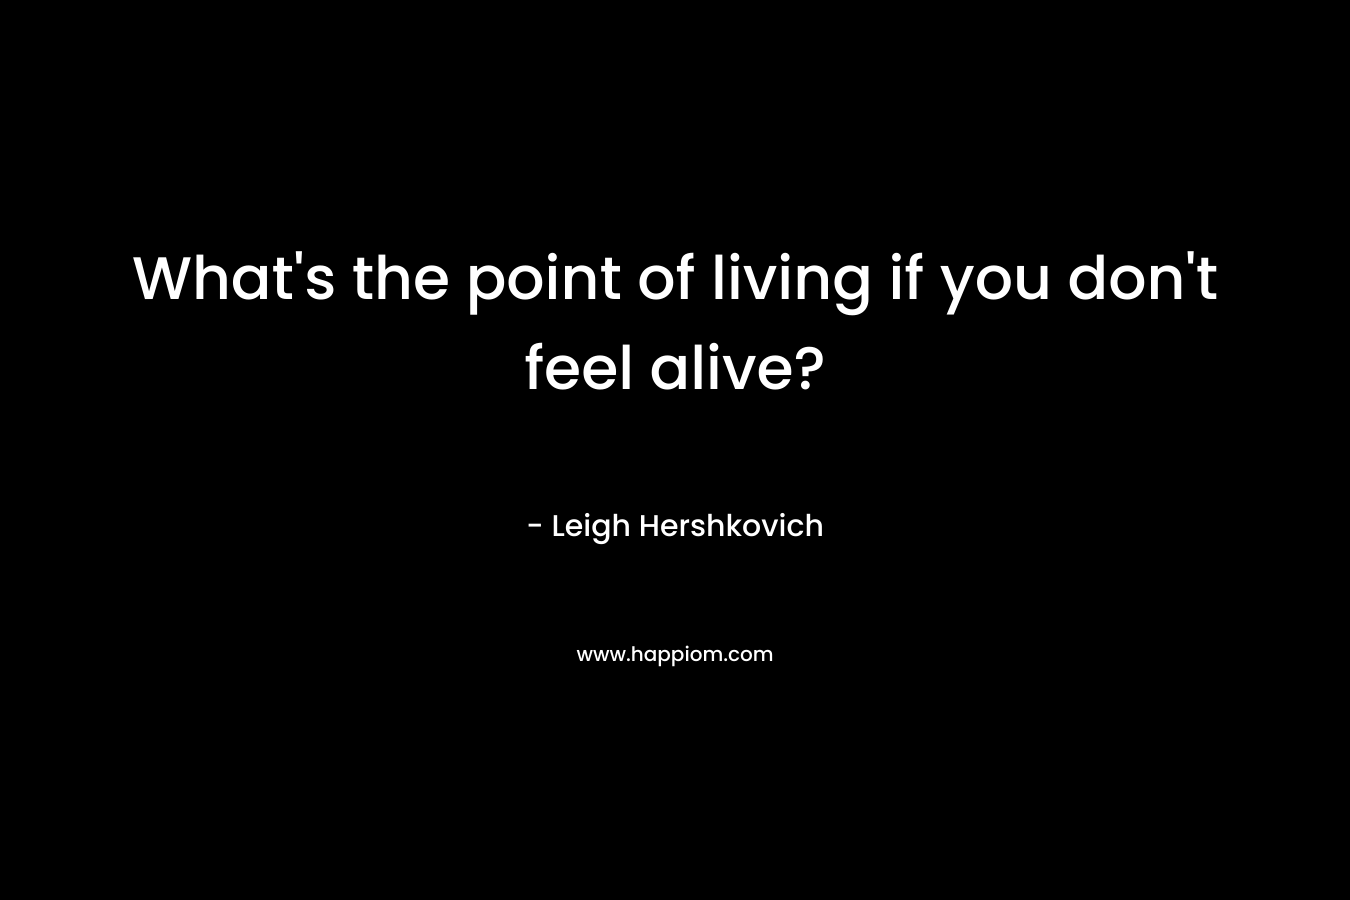 What's the point of living if you don't feel alive?